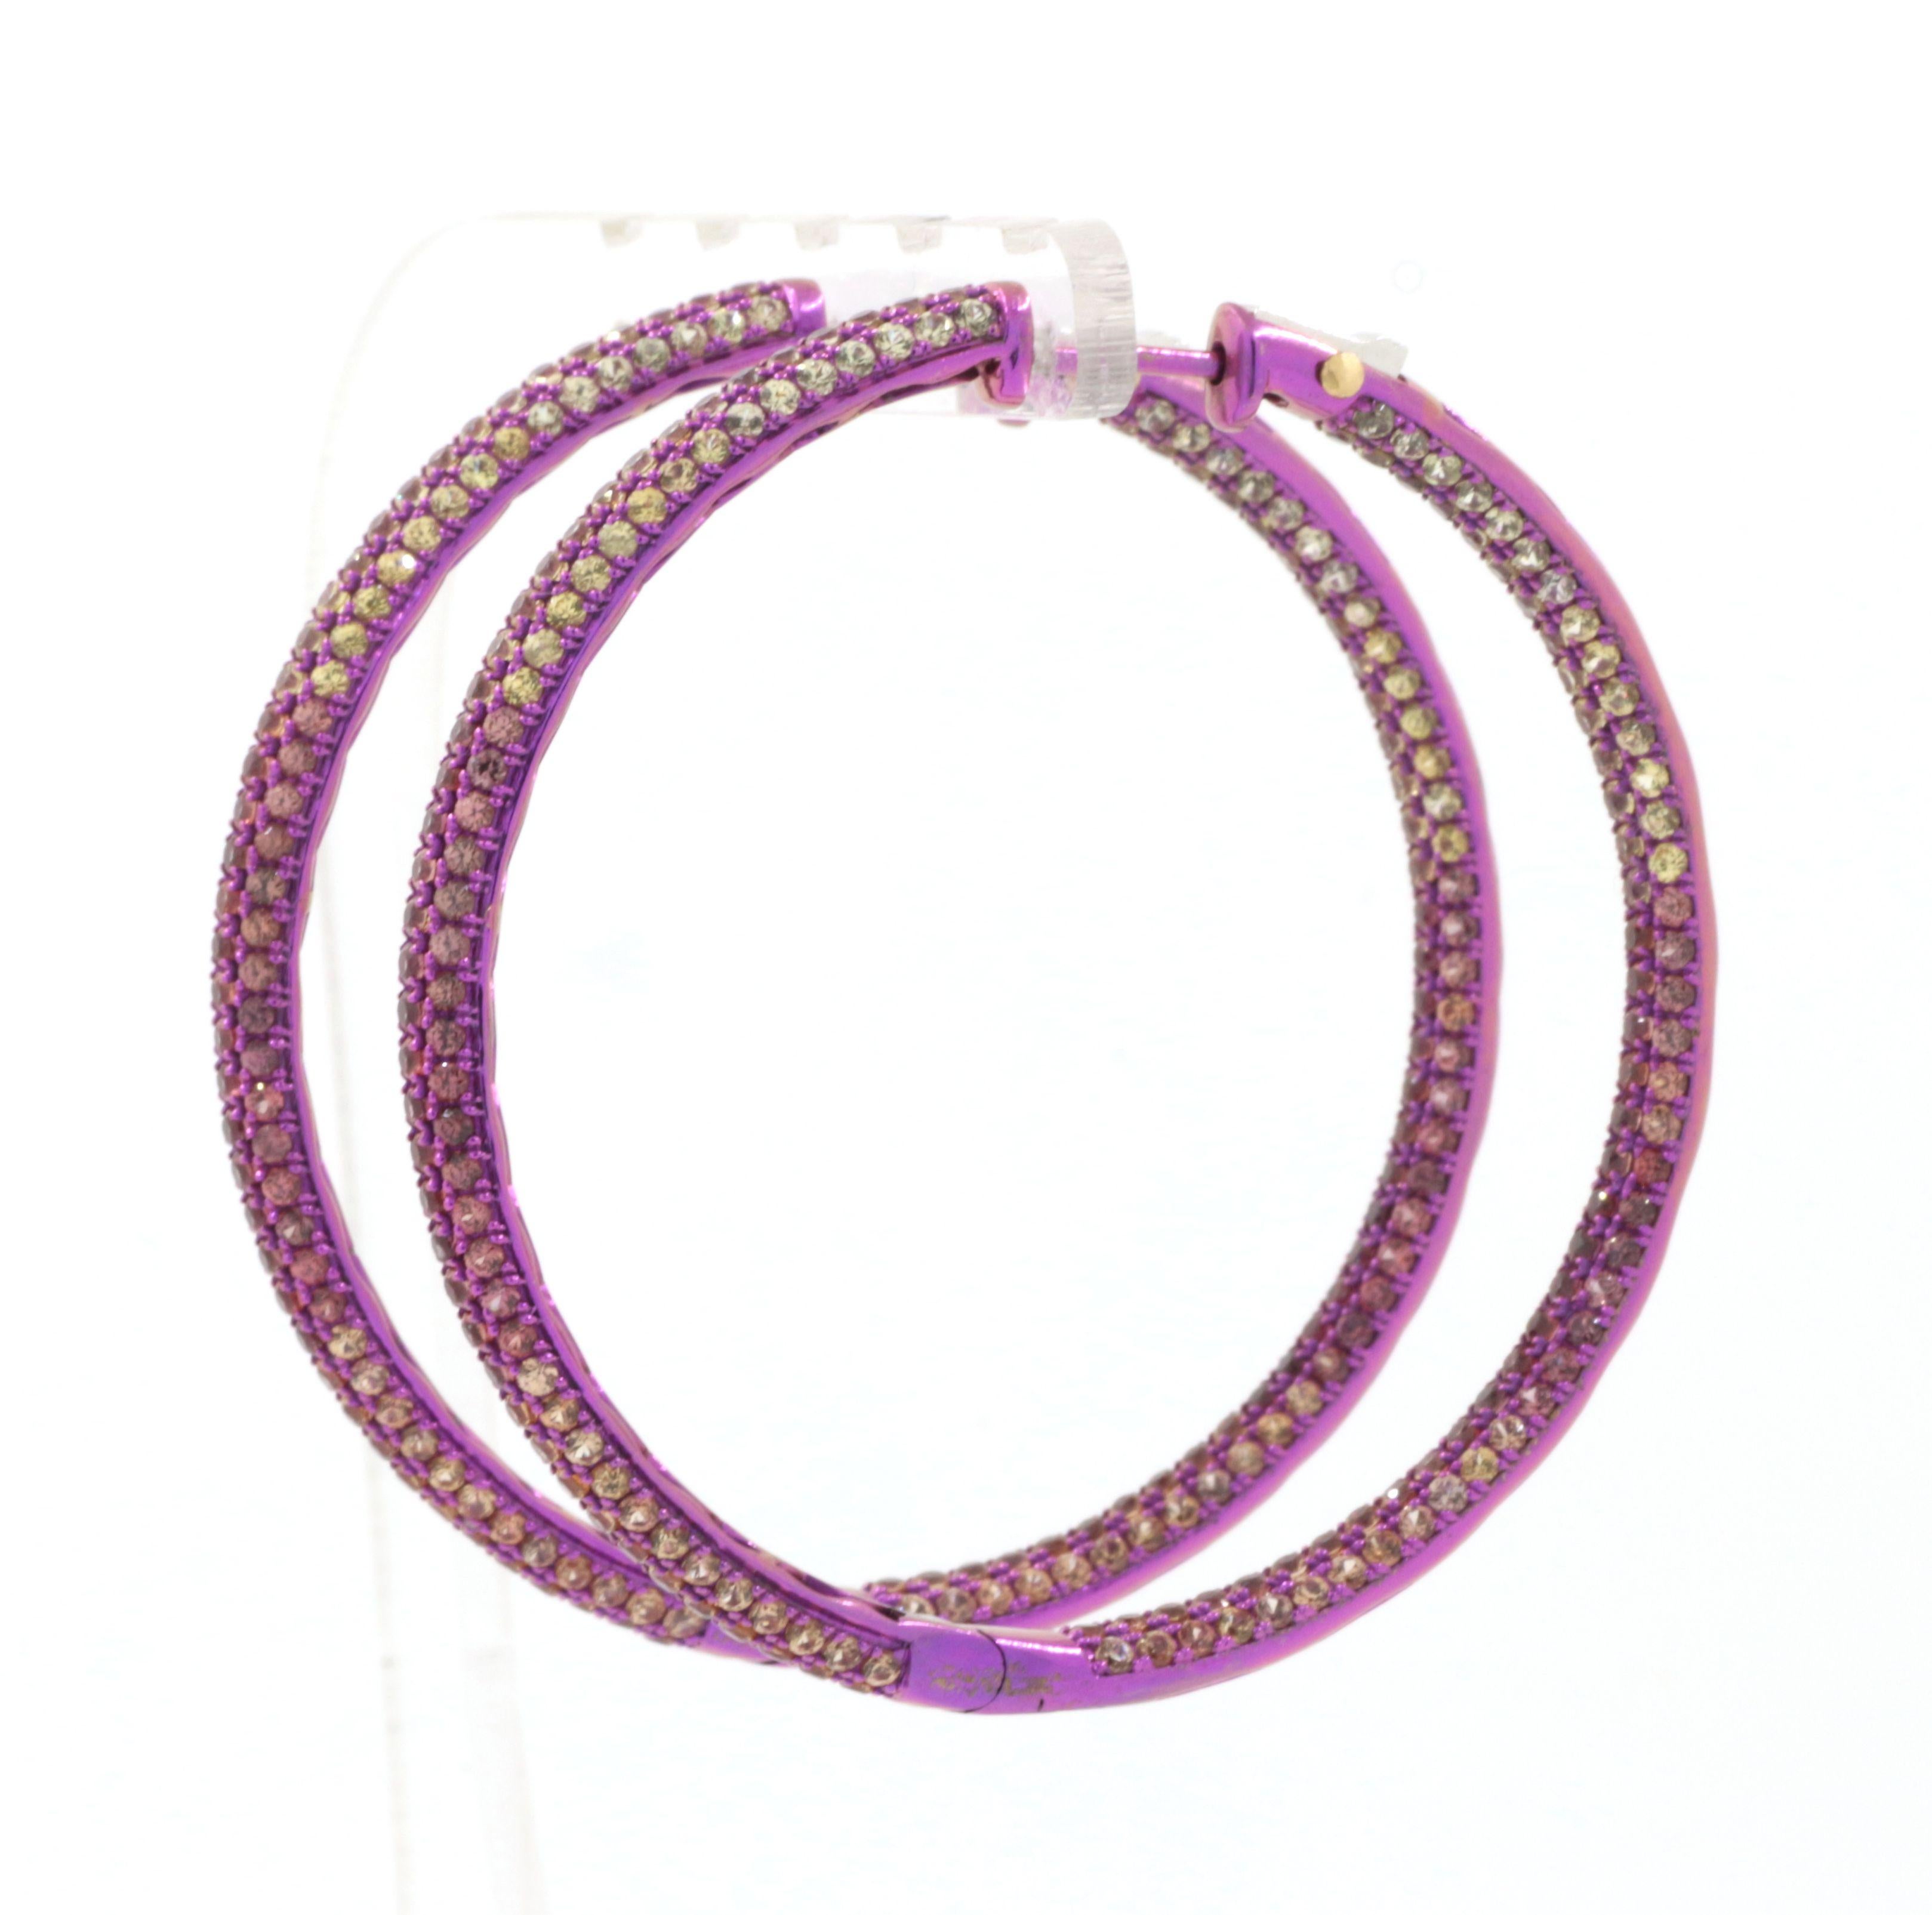 Round Cut 12.81 Carats Fancy Sapphire Hoop Earrings in 18 Karat Gold and Titanium For Sale